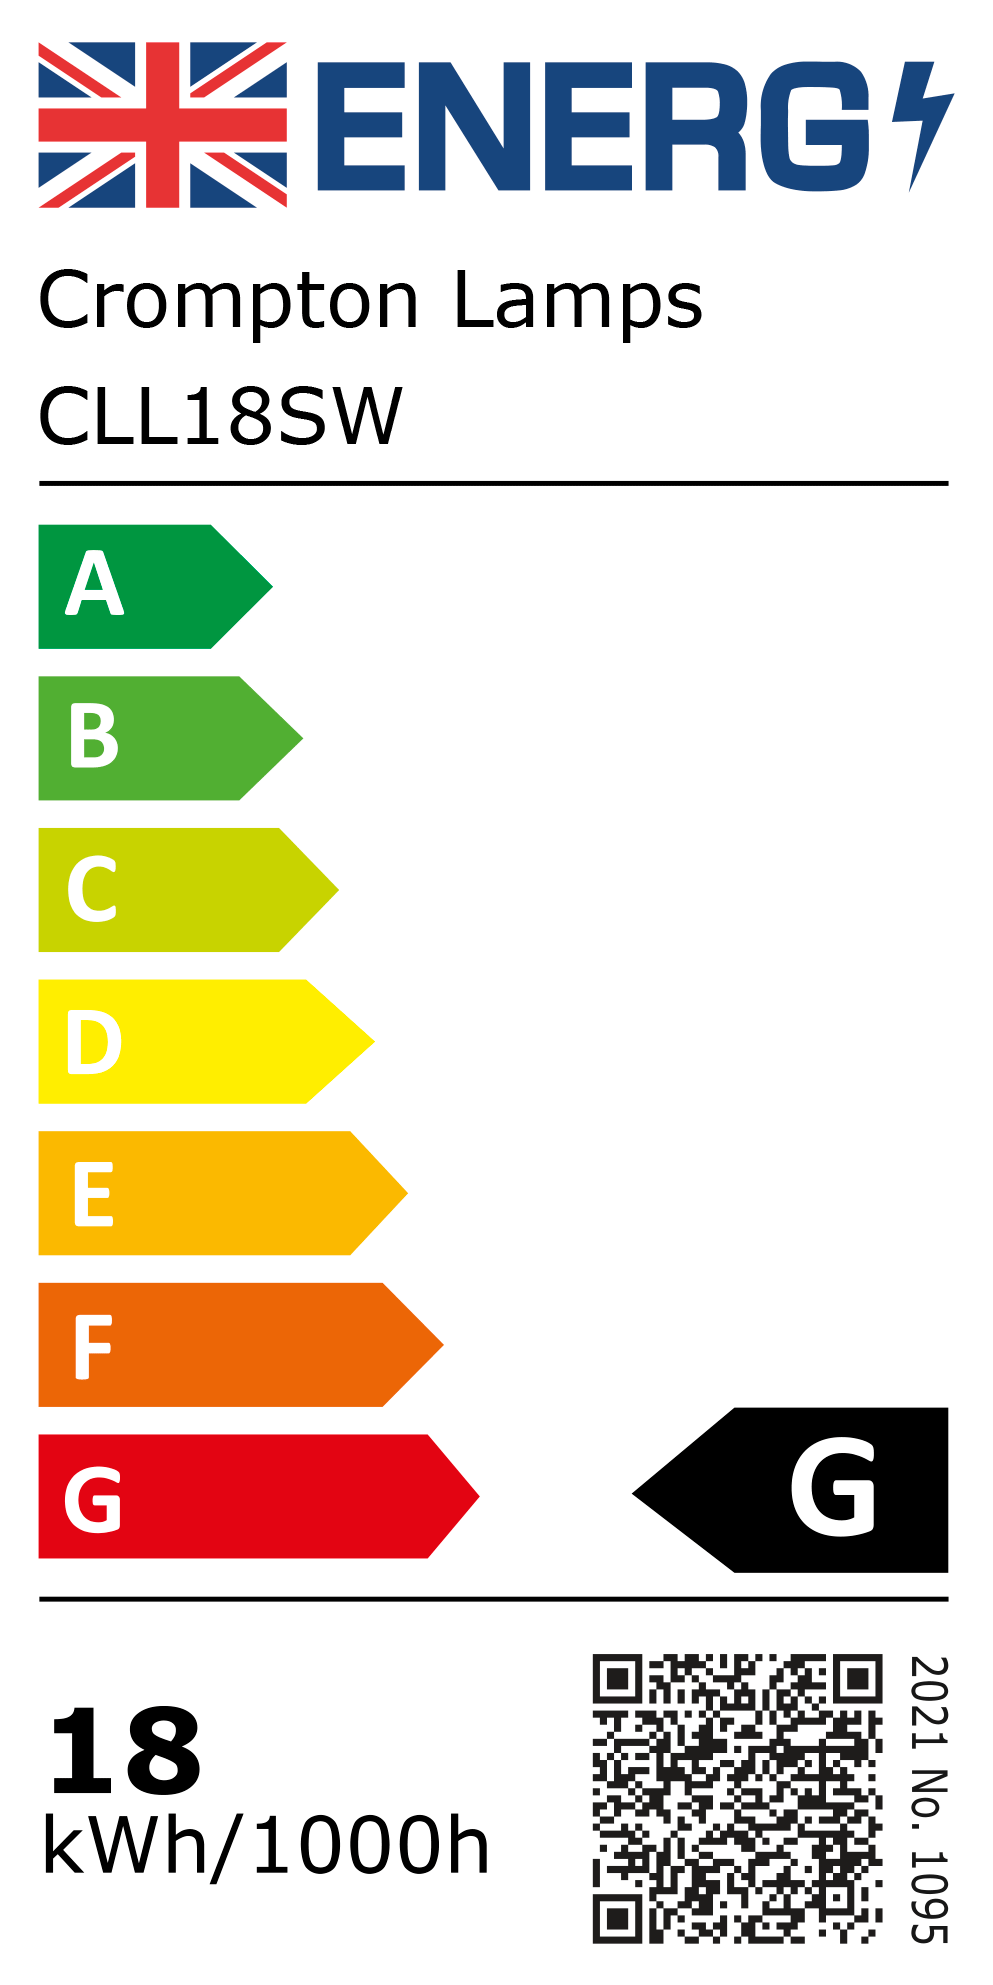 New 2021 Energy Rating Label: Stock Code CLL18SW